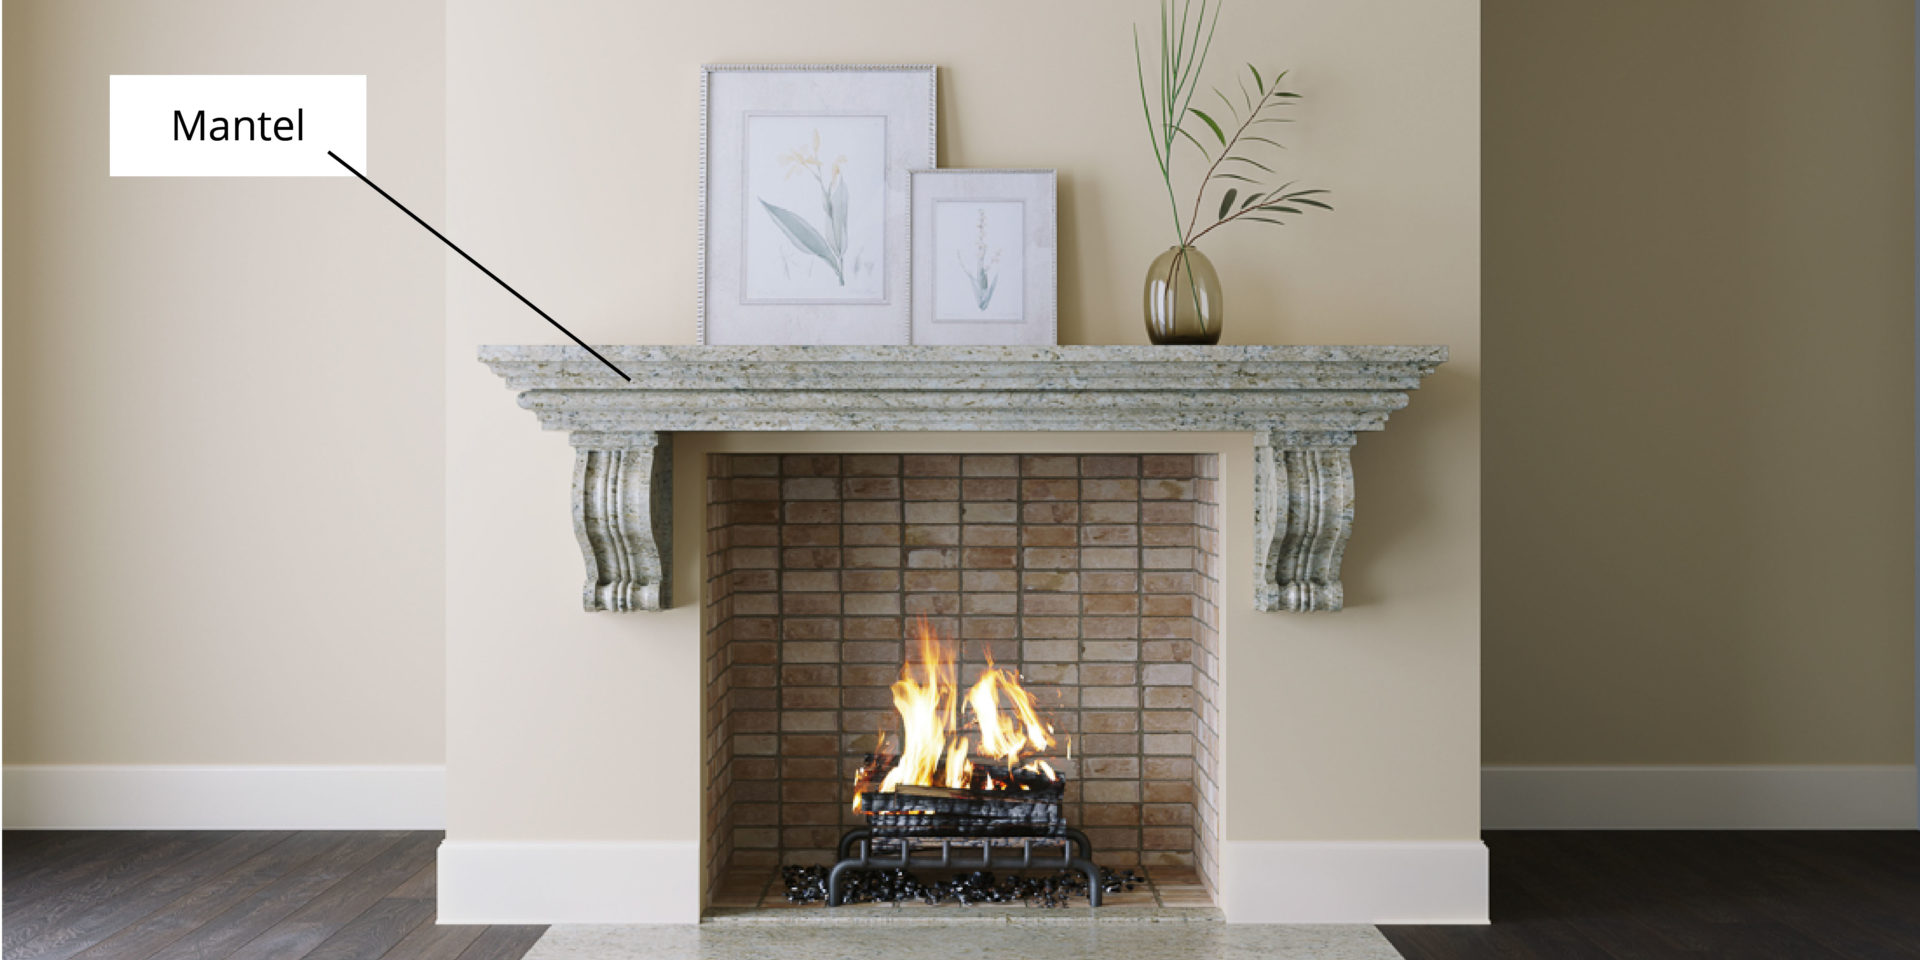 Fireplace Terms 101 The Ultimate Guide, What S The Inside Of A Fireplace Called